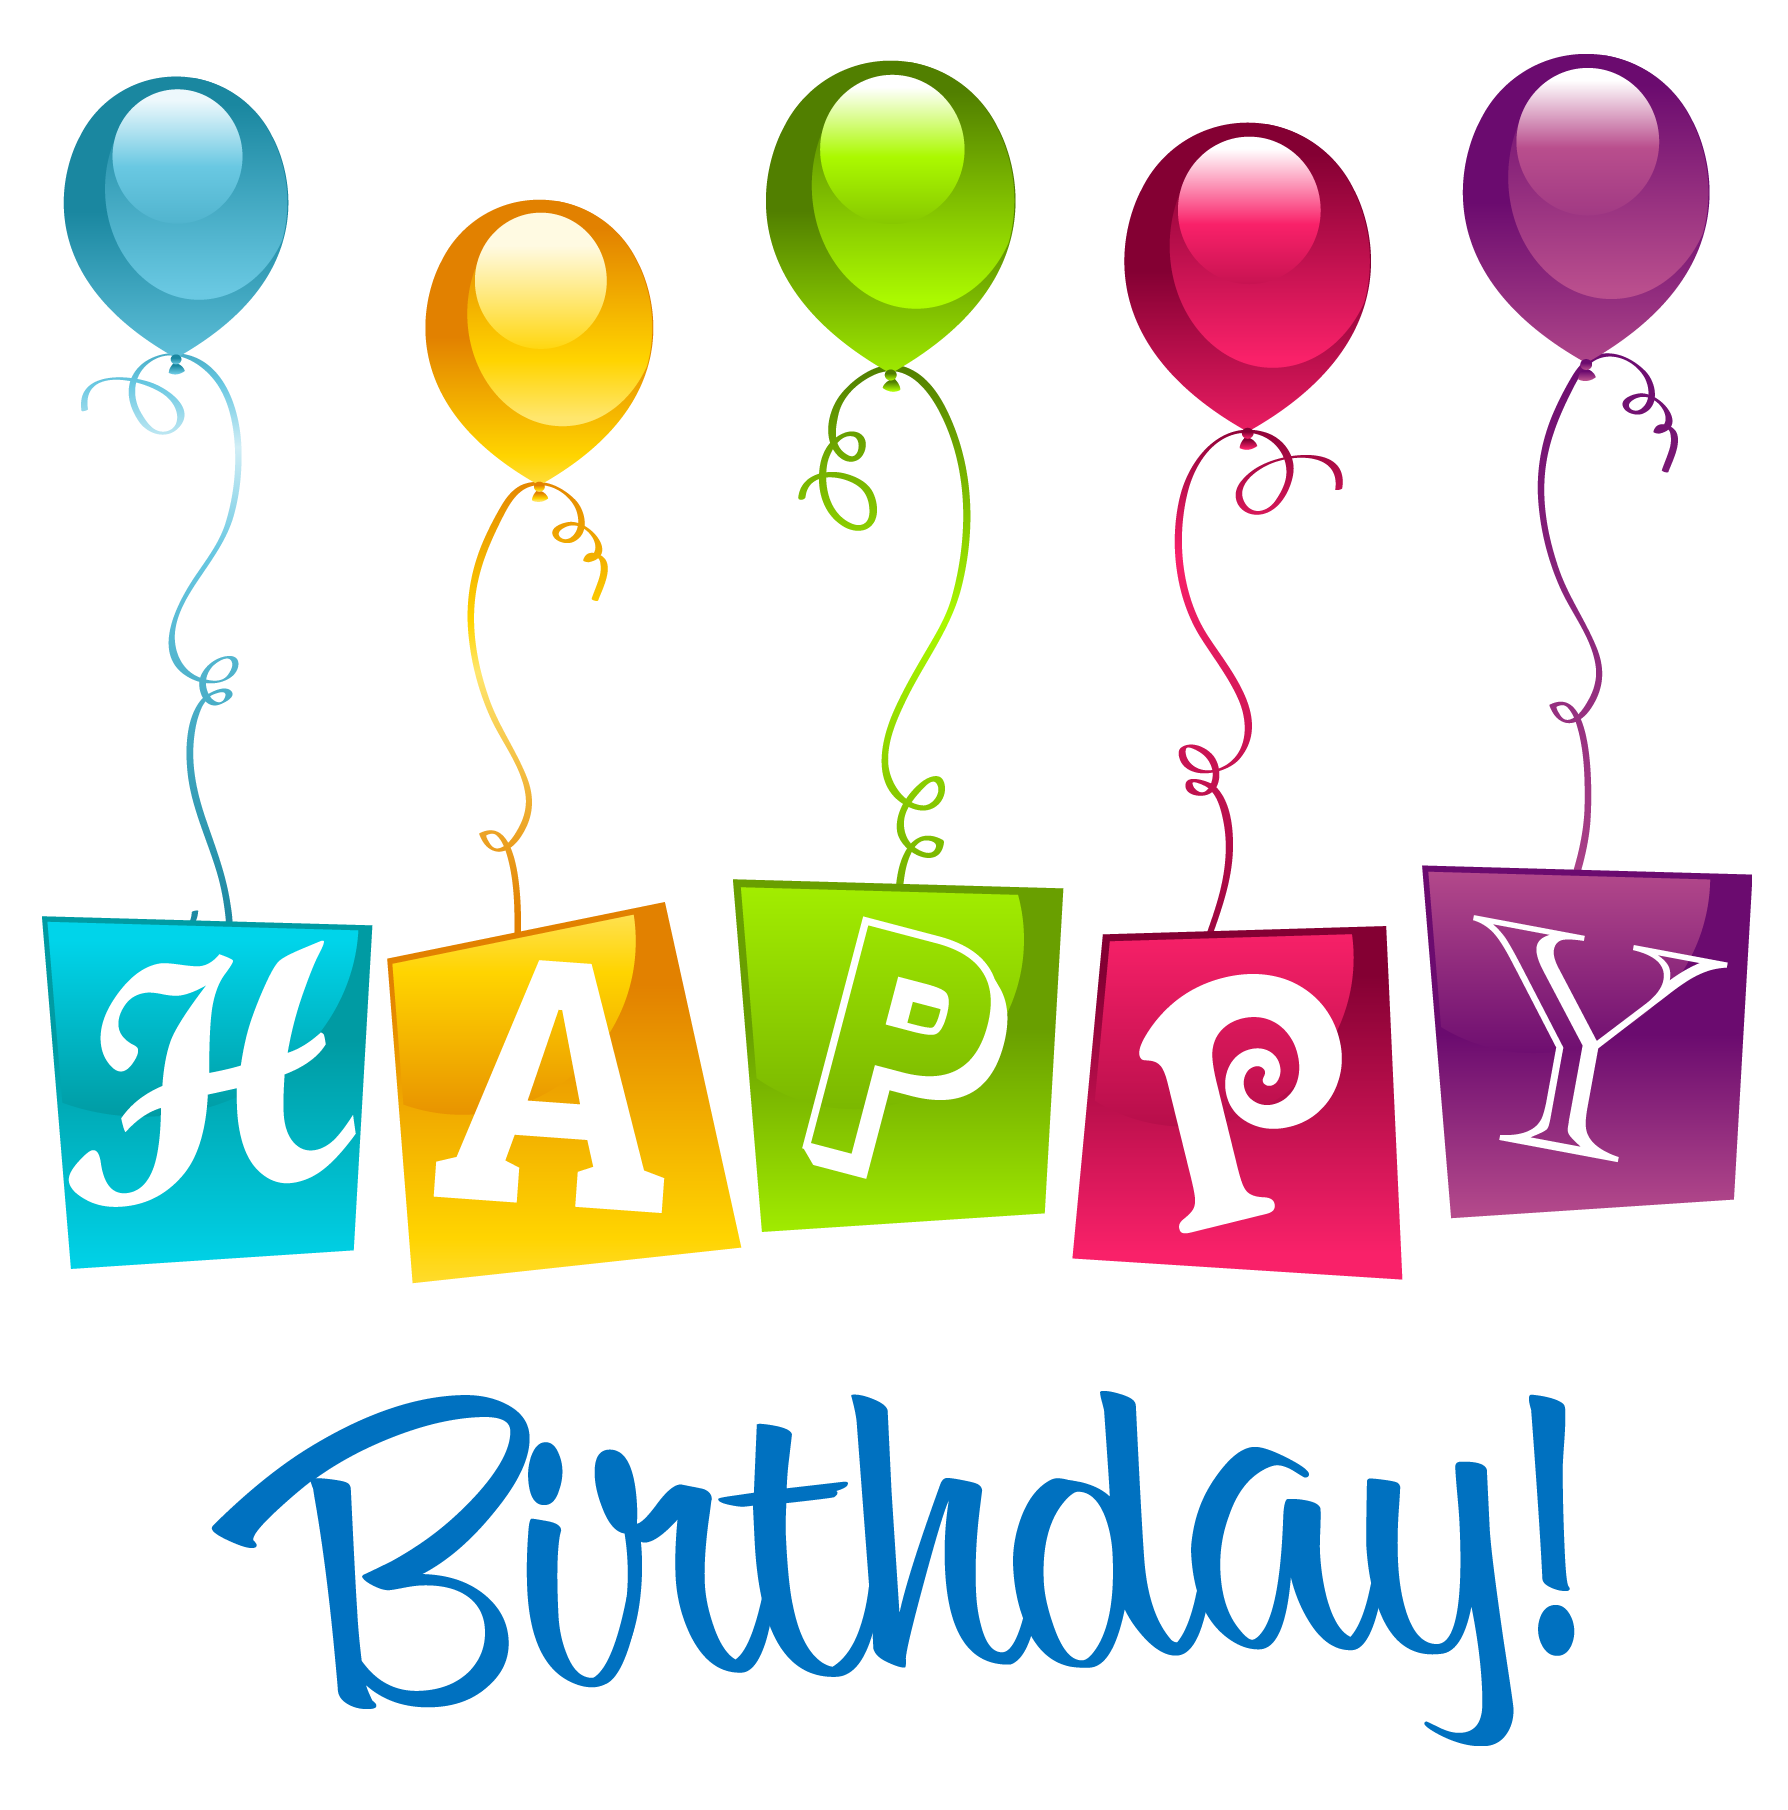 Free Birthday Clip Art Png, Download Free Birthday Clip Art Png png